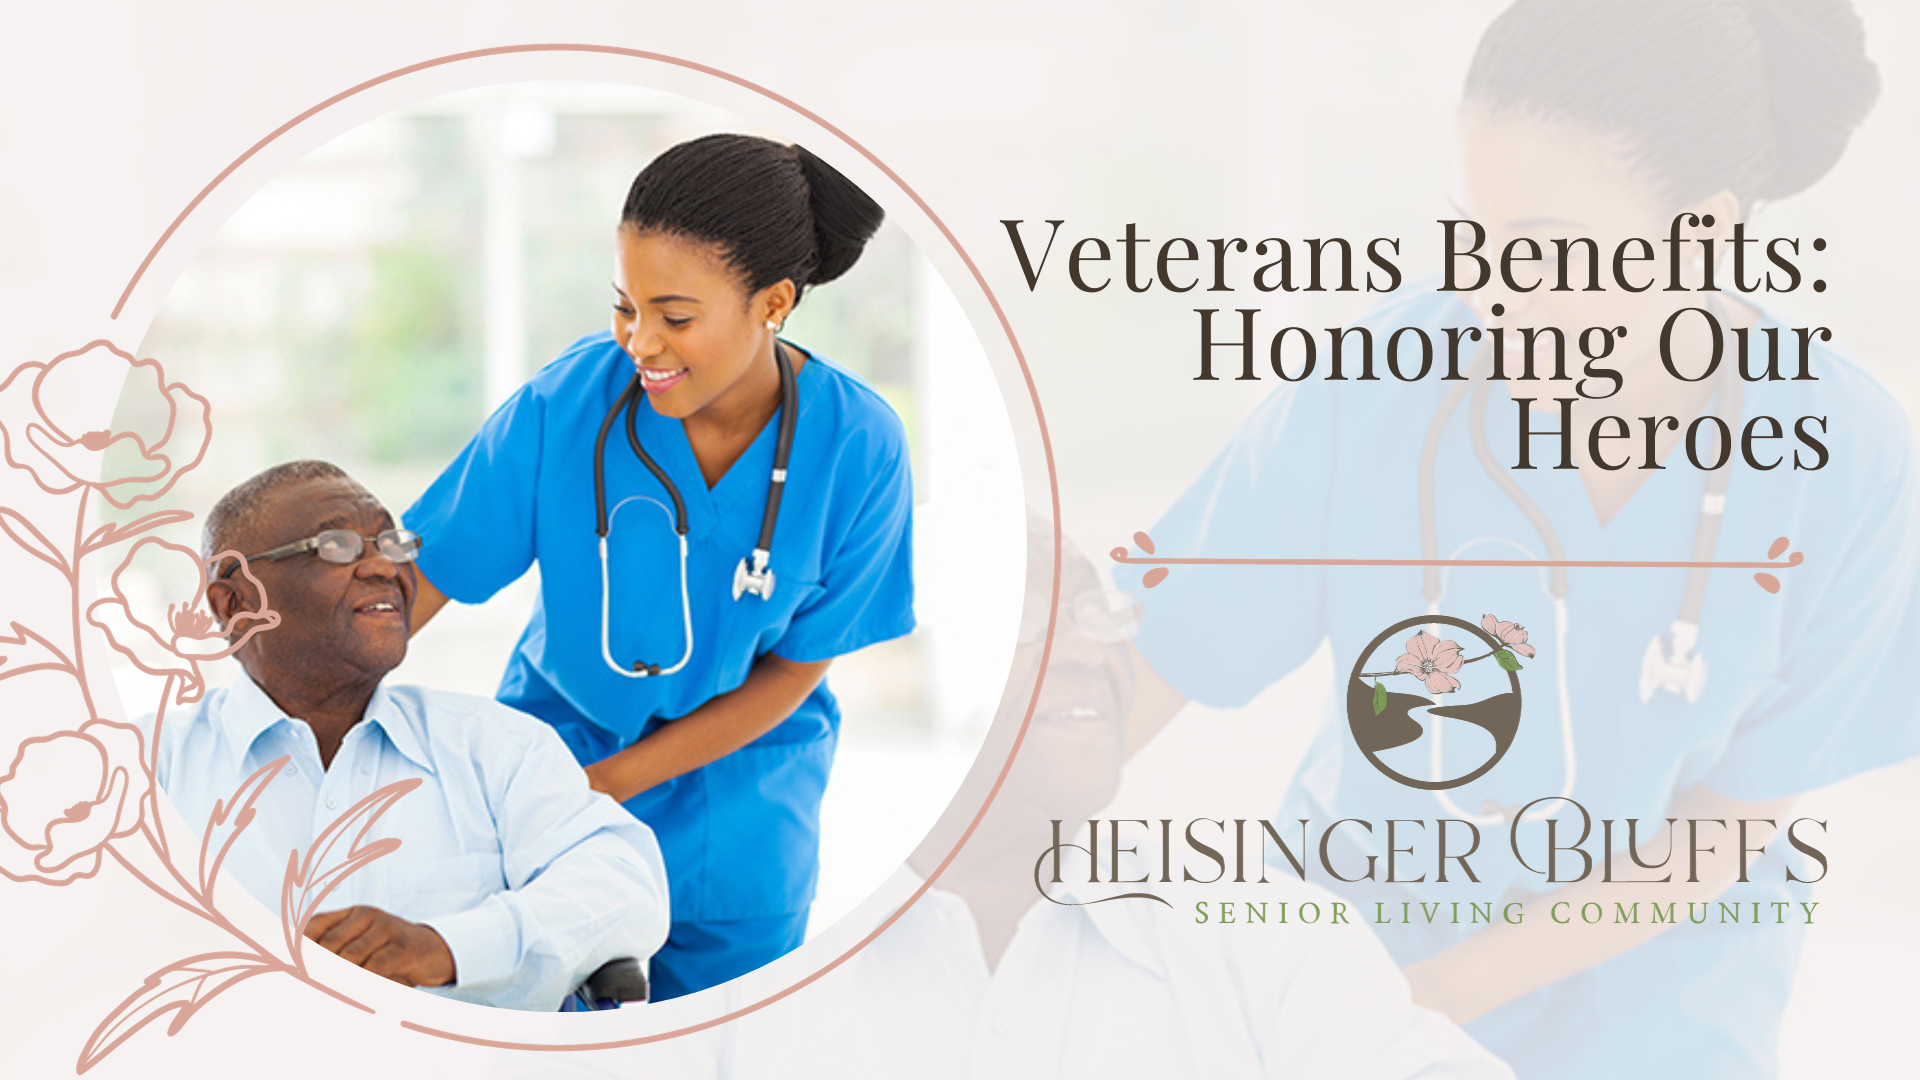 Heisinger Bluffs hold a deep commitment to supporting our veterans o assist you in determining your eligibility for VA Aid and Attendance benefits